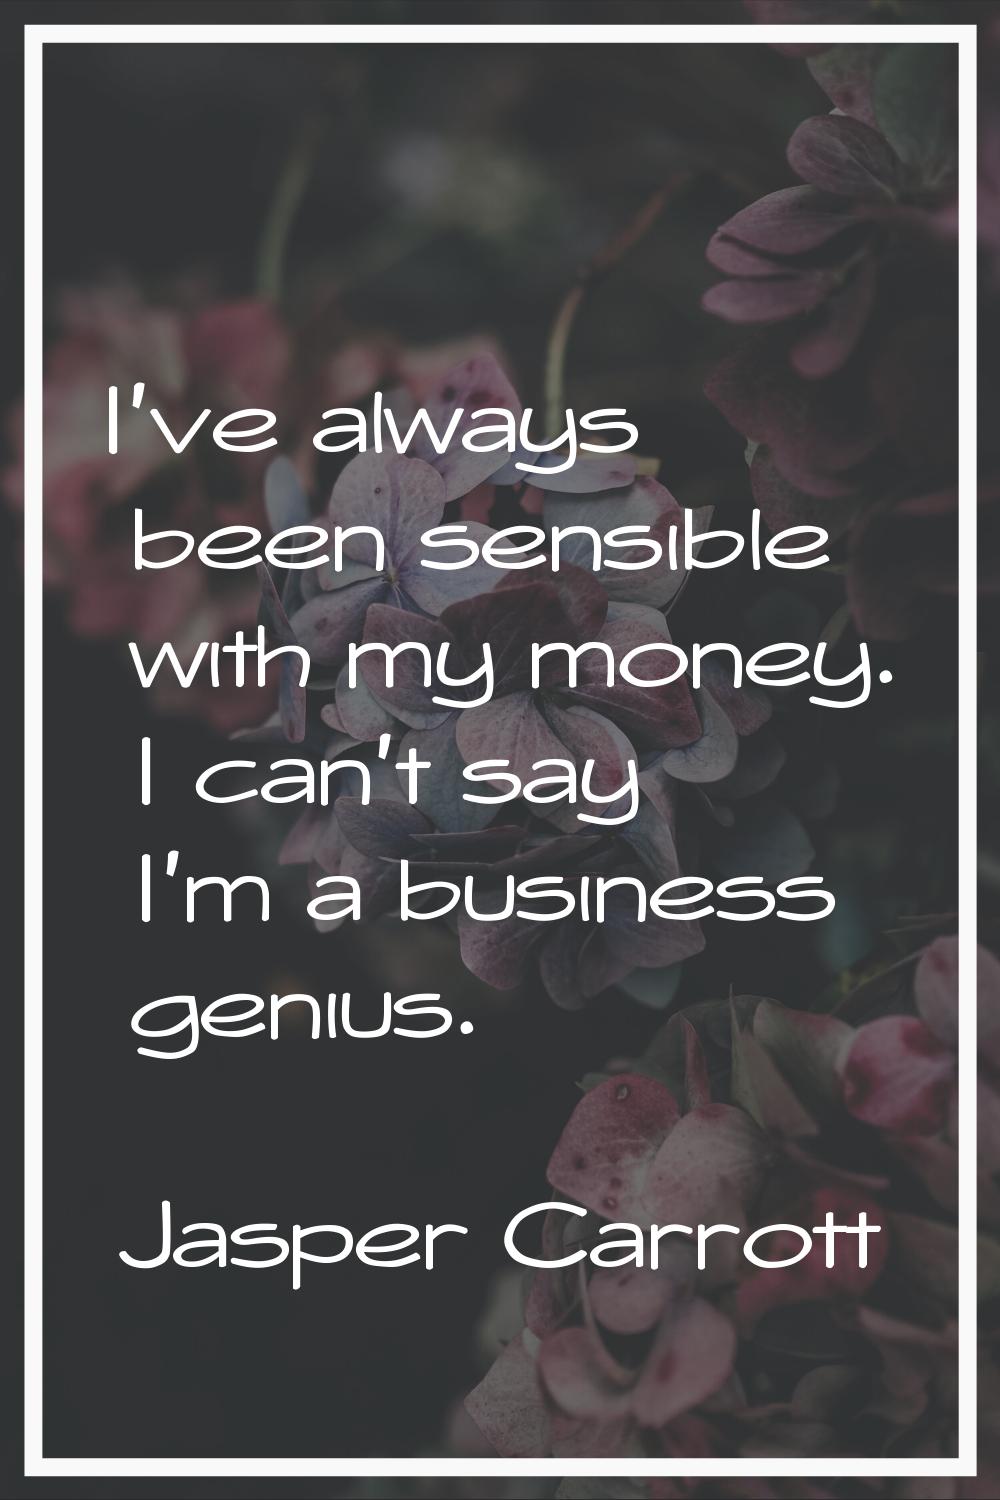 I've always been sensible with my money. I can't say I'm a business genius.